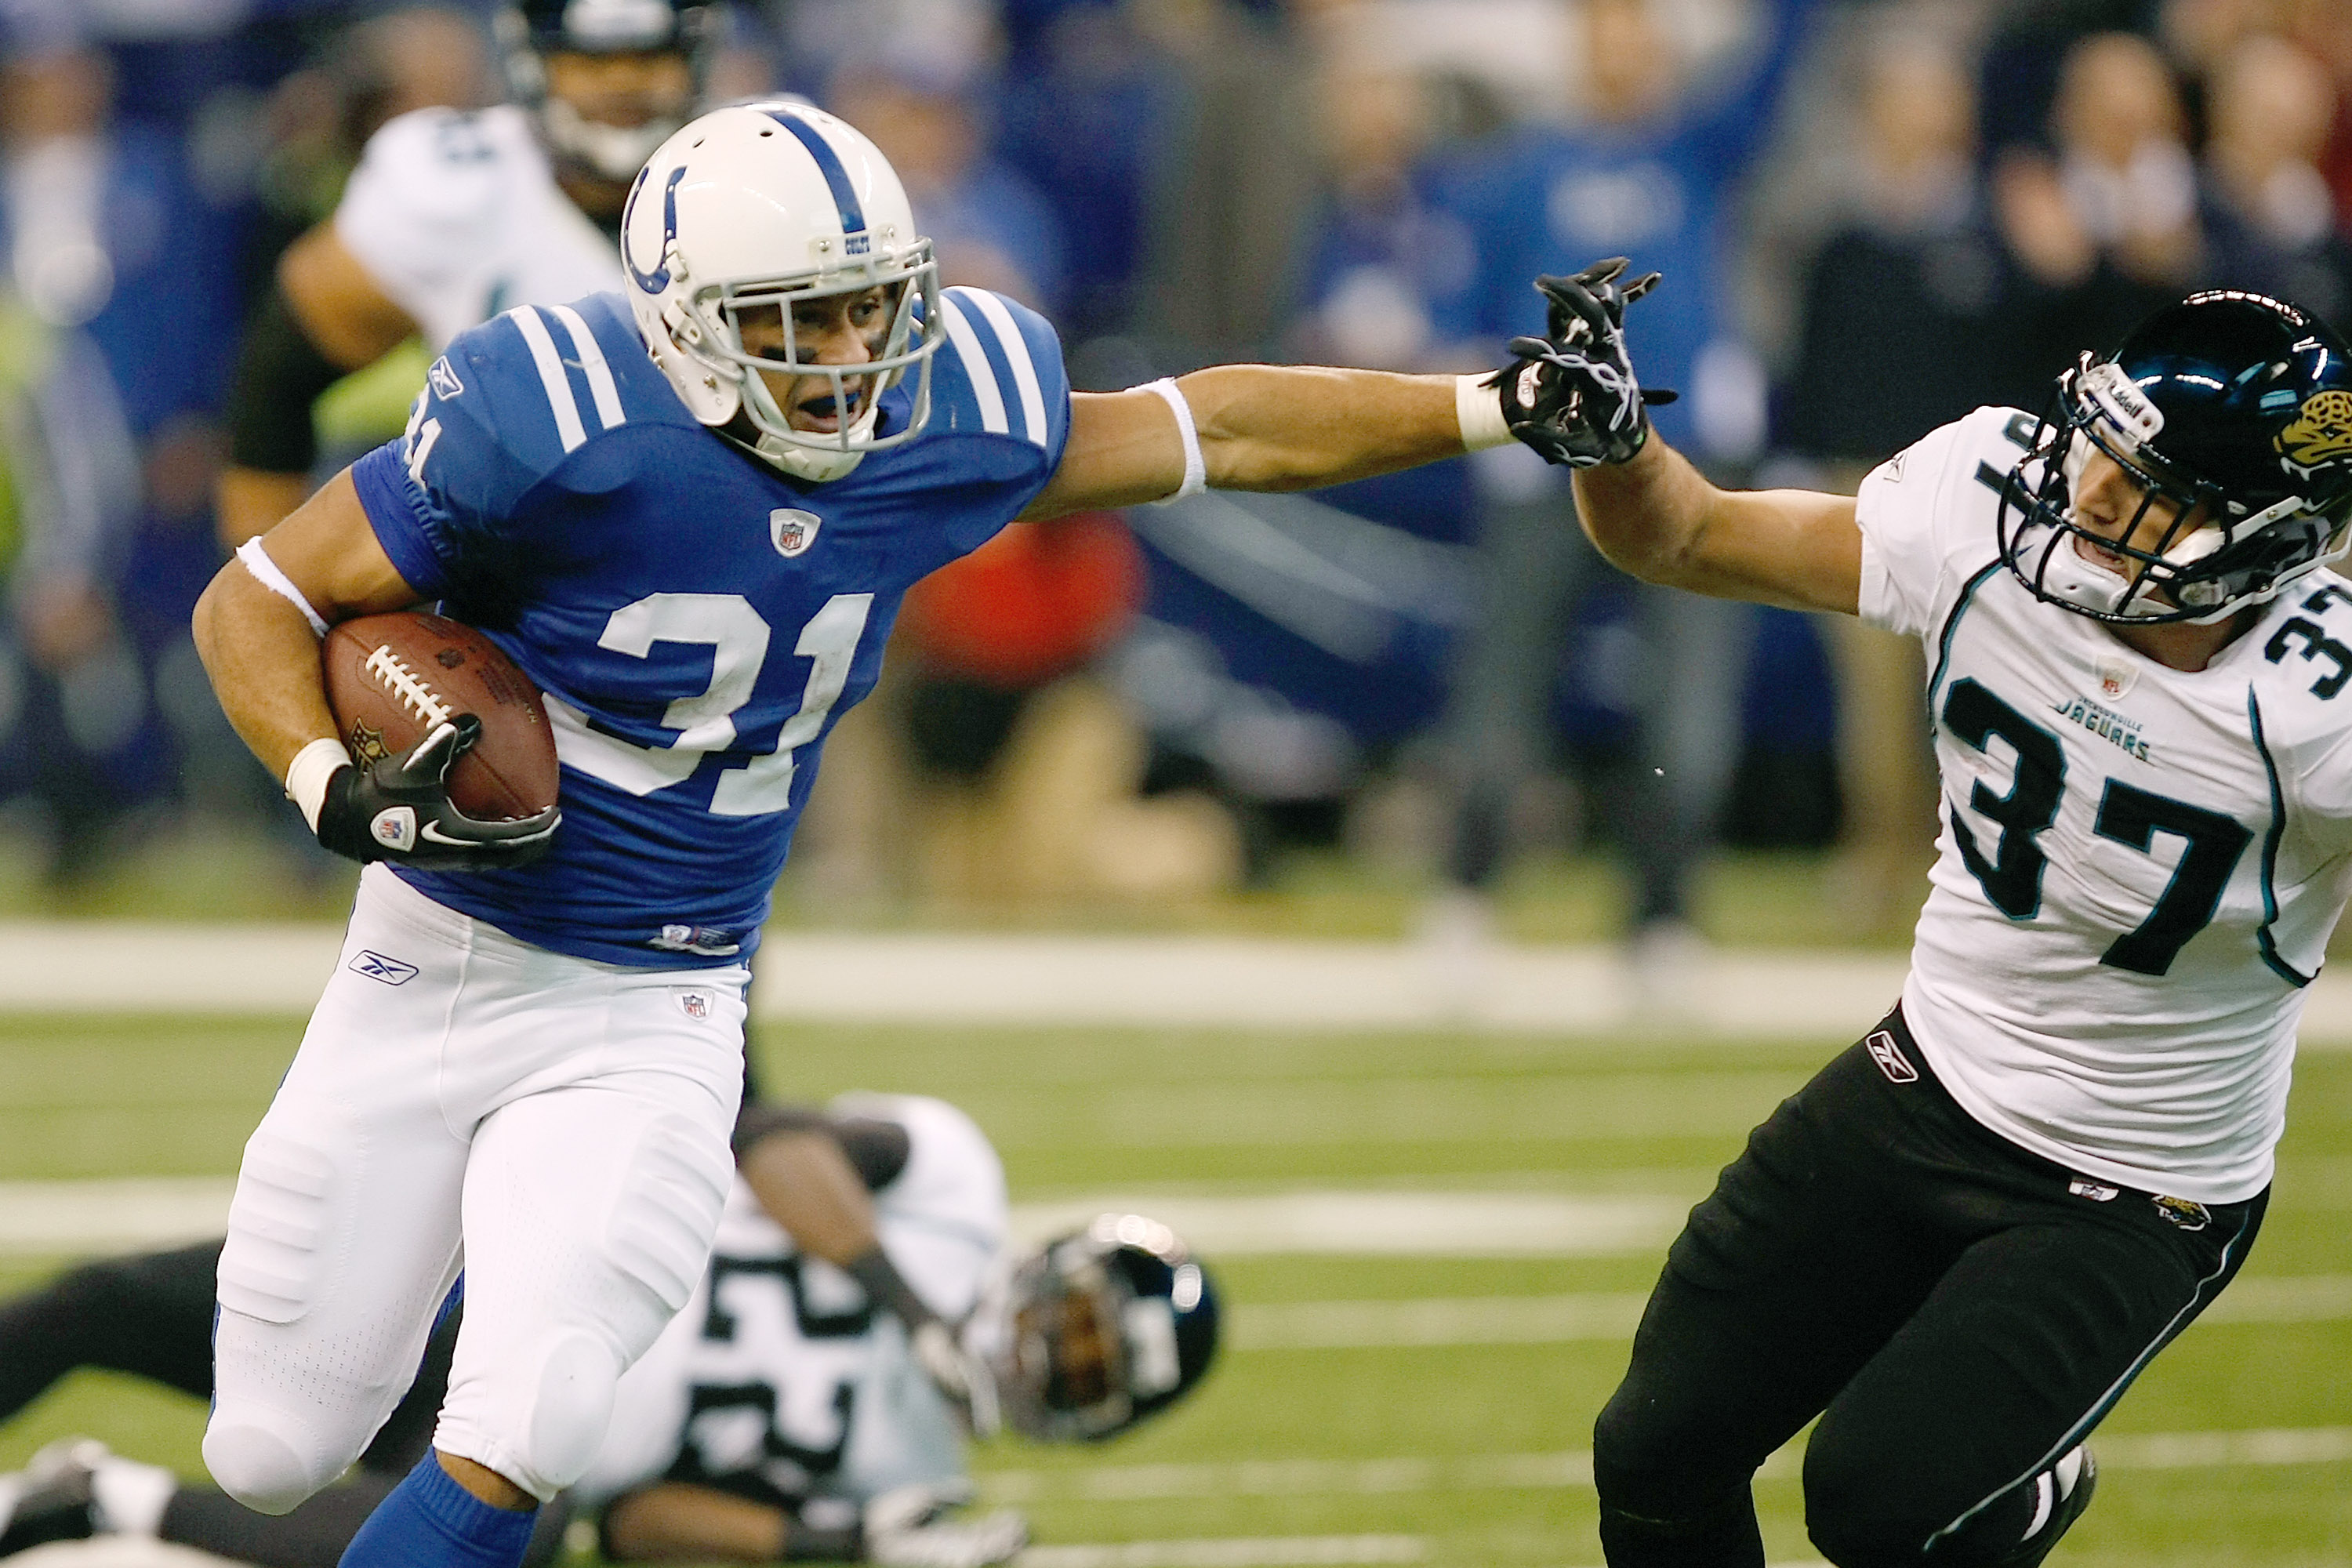 INDIANAPOLIS, IN - DECEMBER 19: Donald Brown #31 of the Indianapolis Colts runs as he is pursued by Tyron Brackenridge #37 of the Jacksonville Jaguars at Lucas Oil Stadium on December 19, 2010 in Indianapolis, Indiana.   The Colts defeated the Jaguars 34-